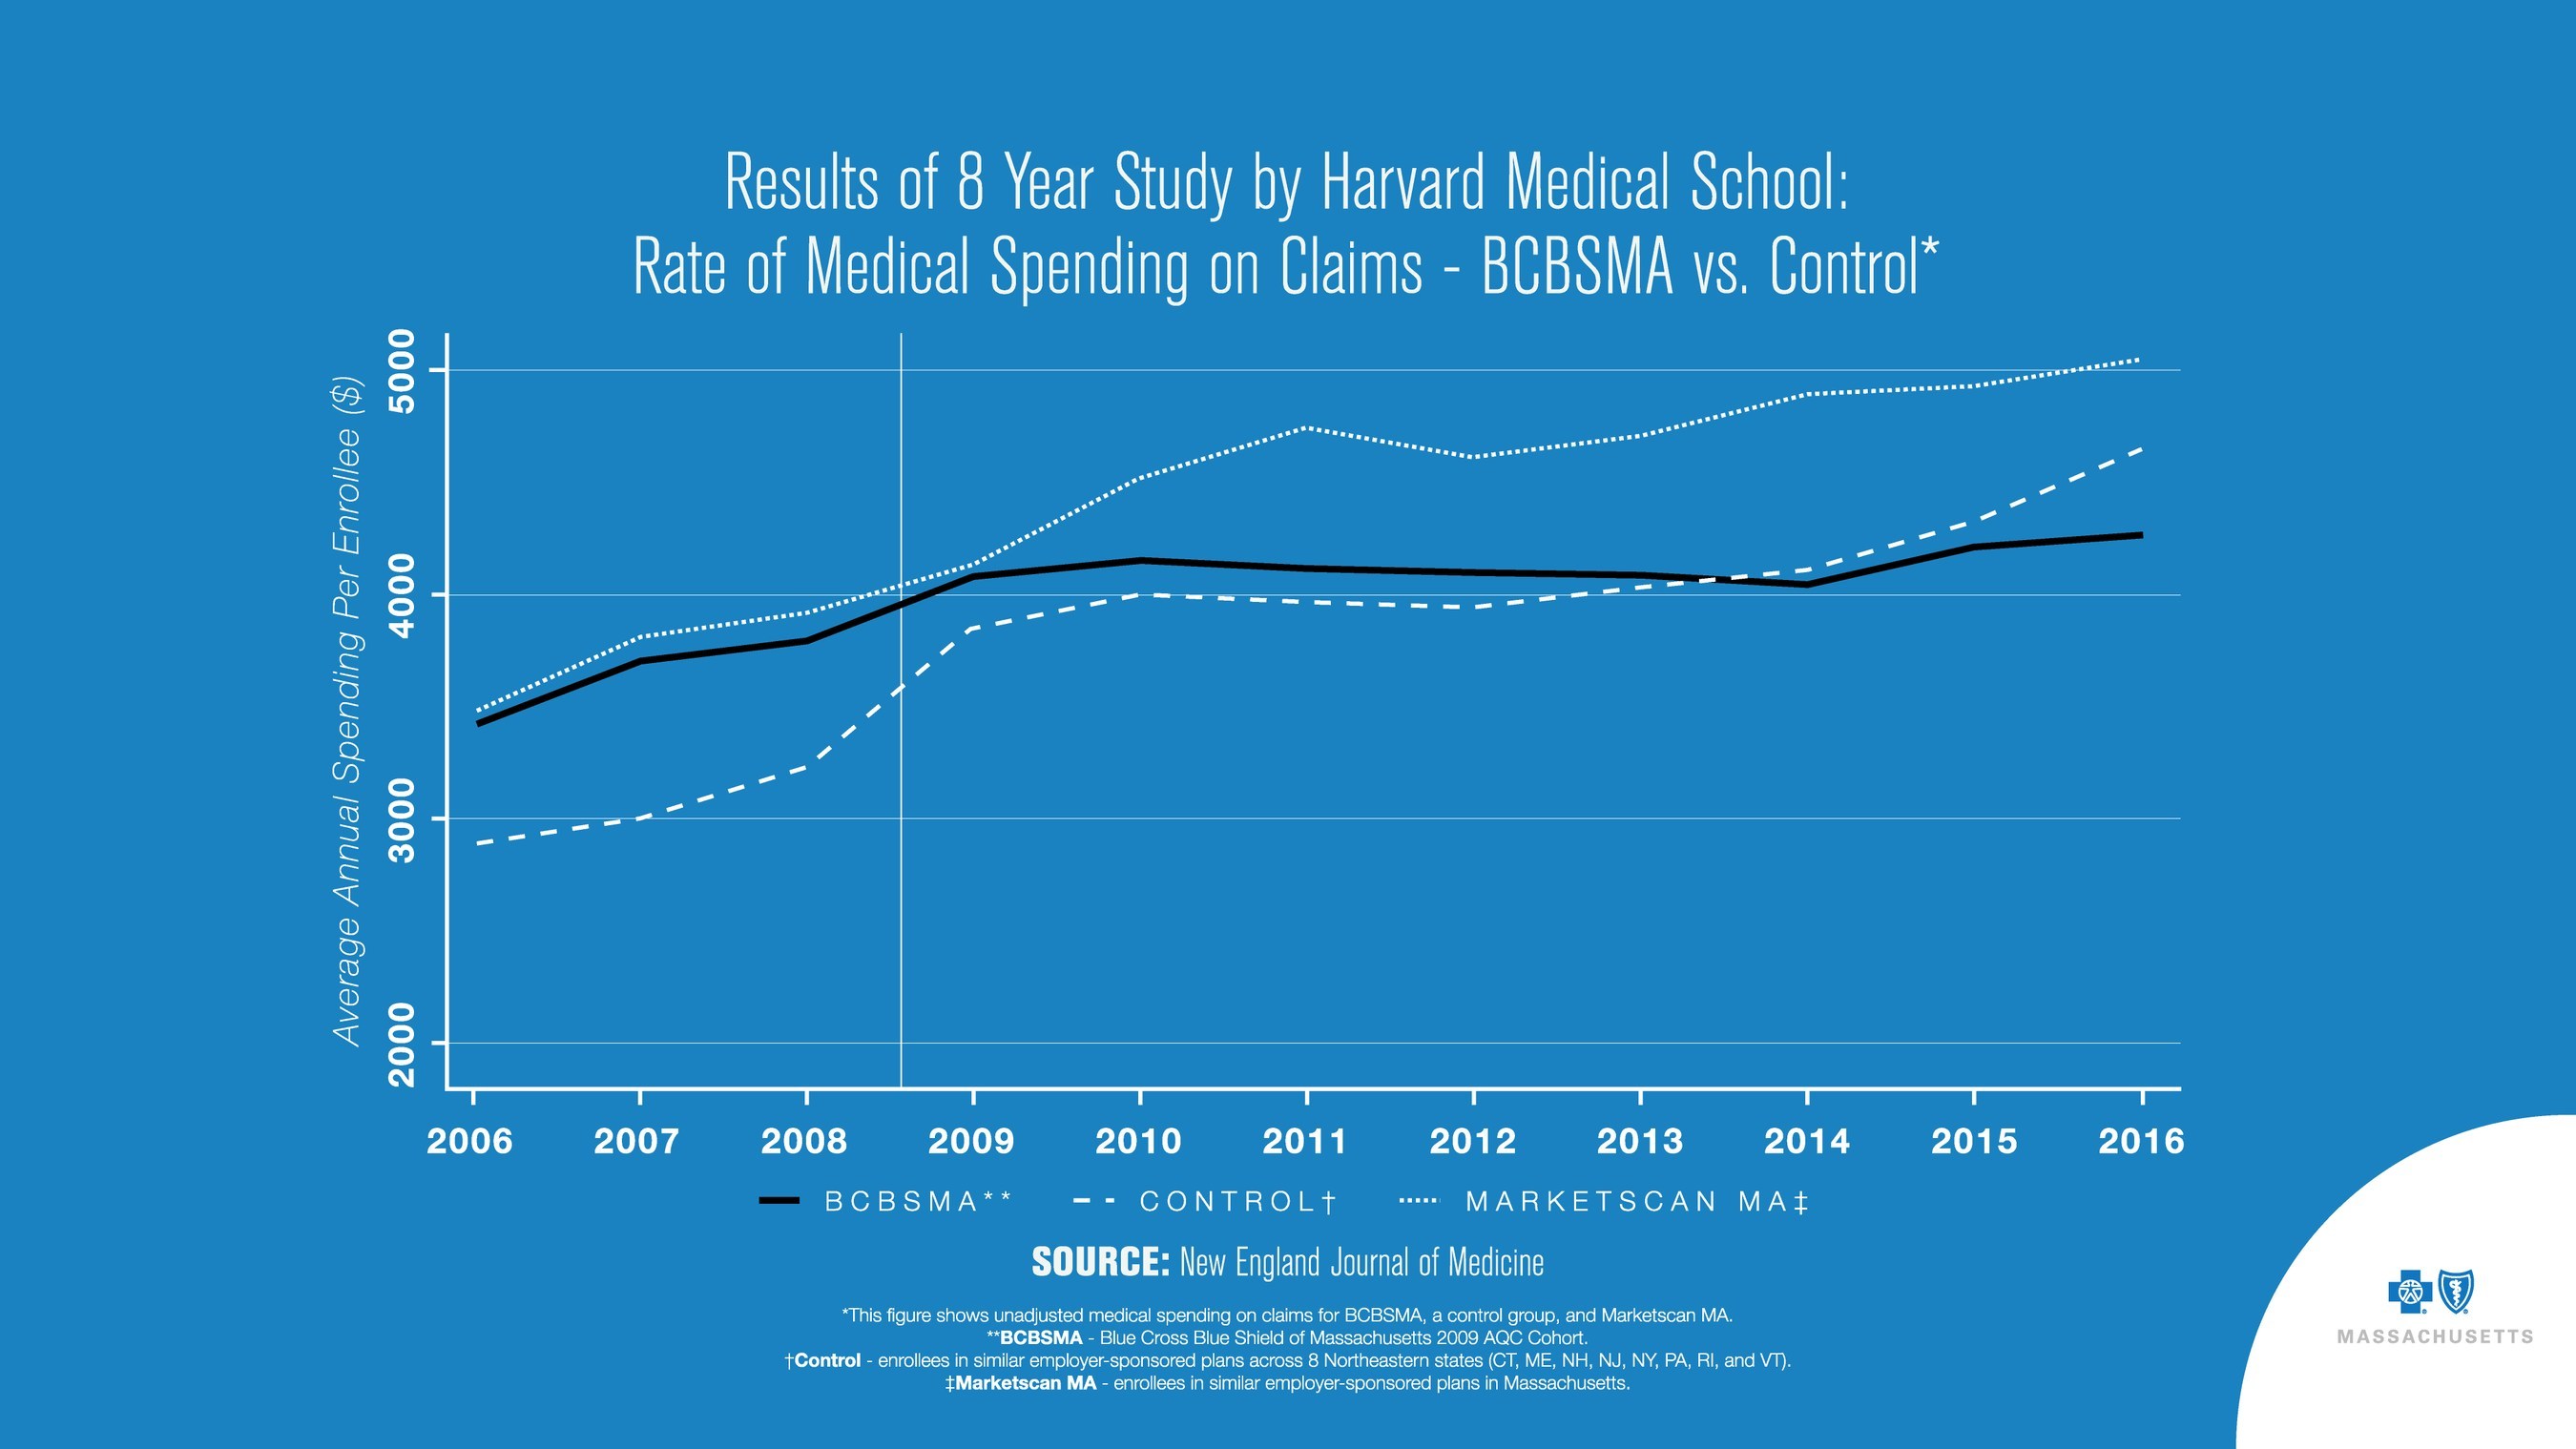 New Harvard Medical School Study Finds Blue Cross Blue Shield of Massachusetts Alternative Quality Contract Slowed Spending, Improved Care Over 8 Years